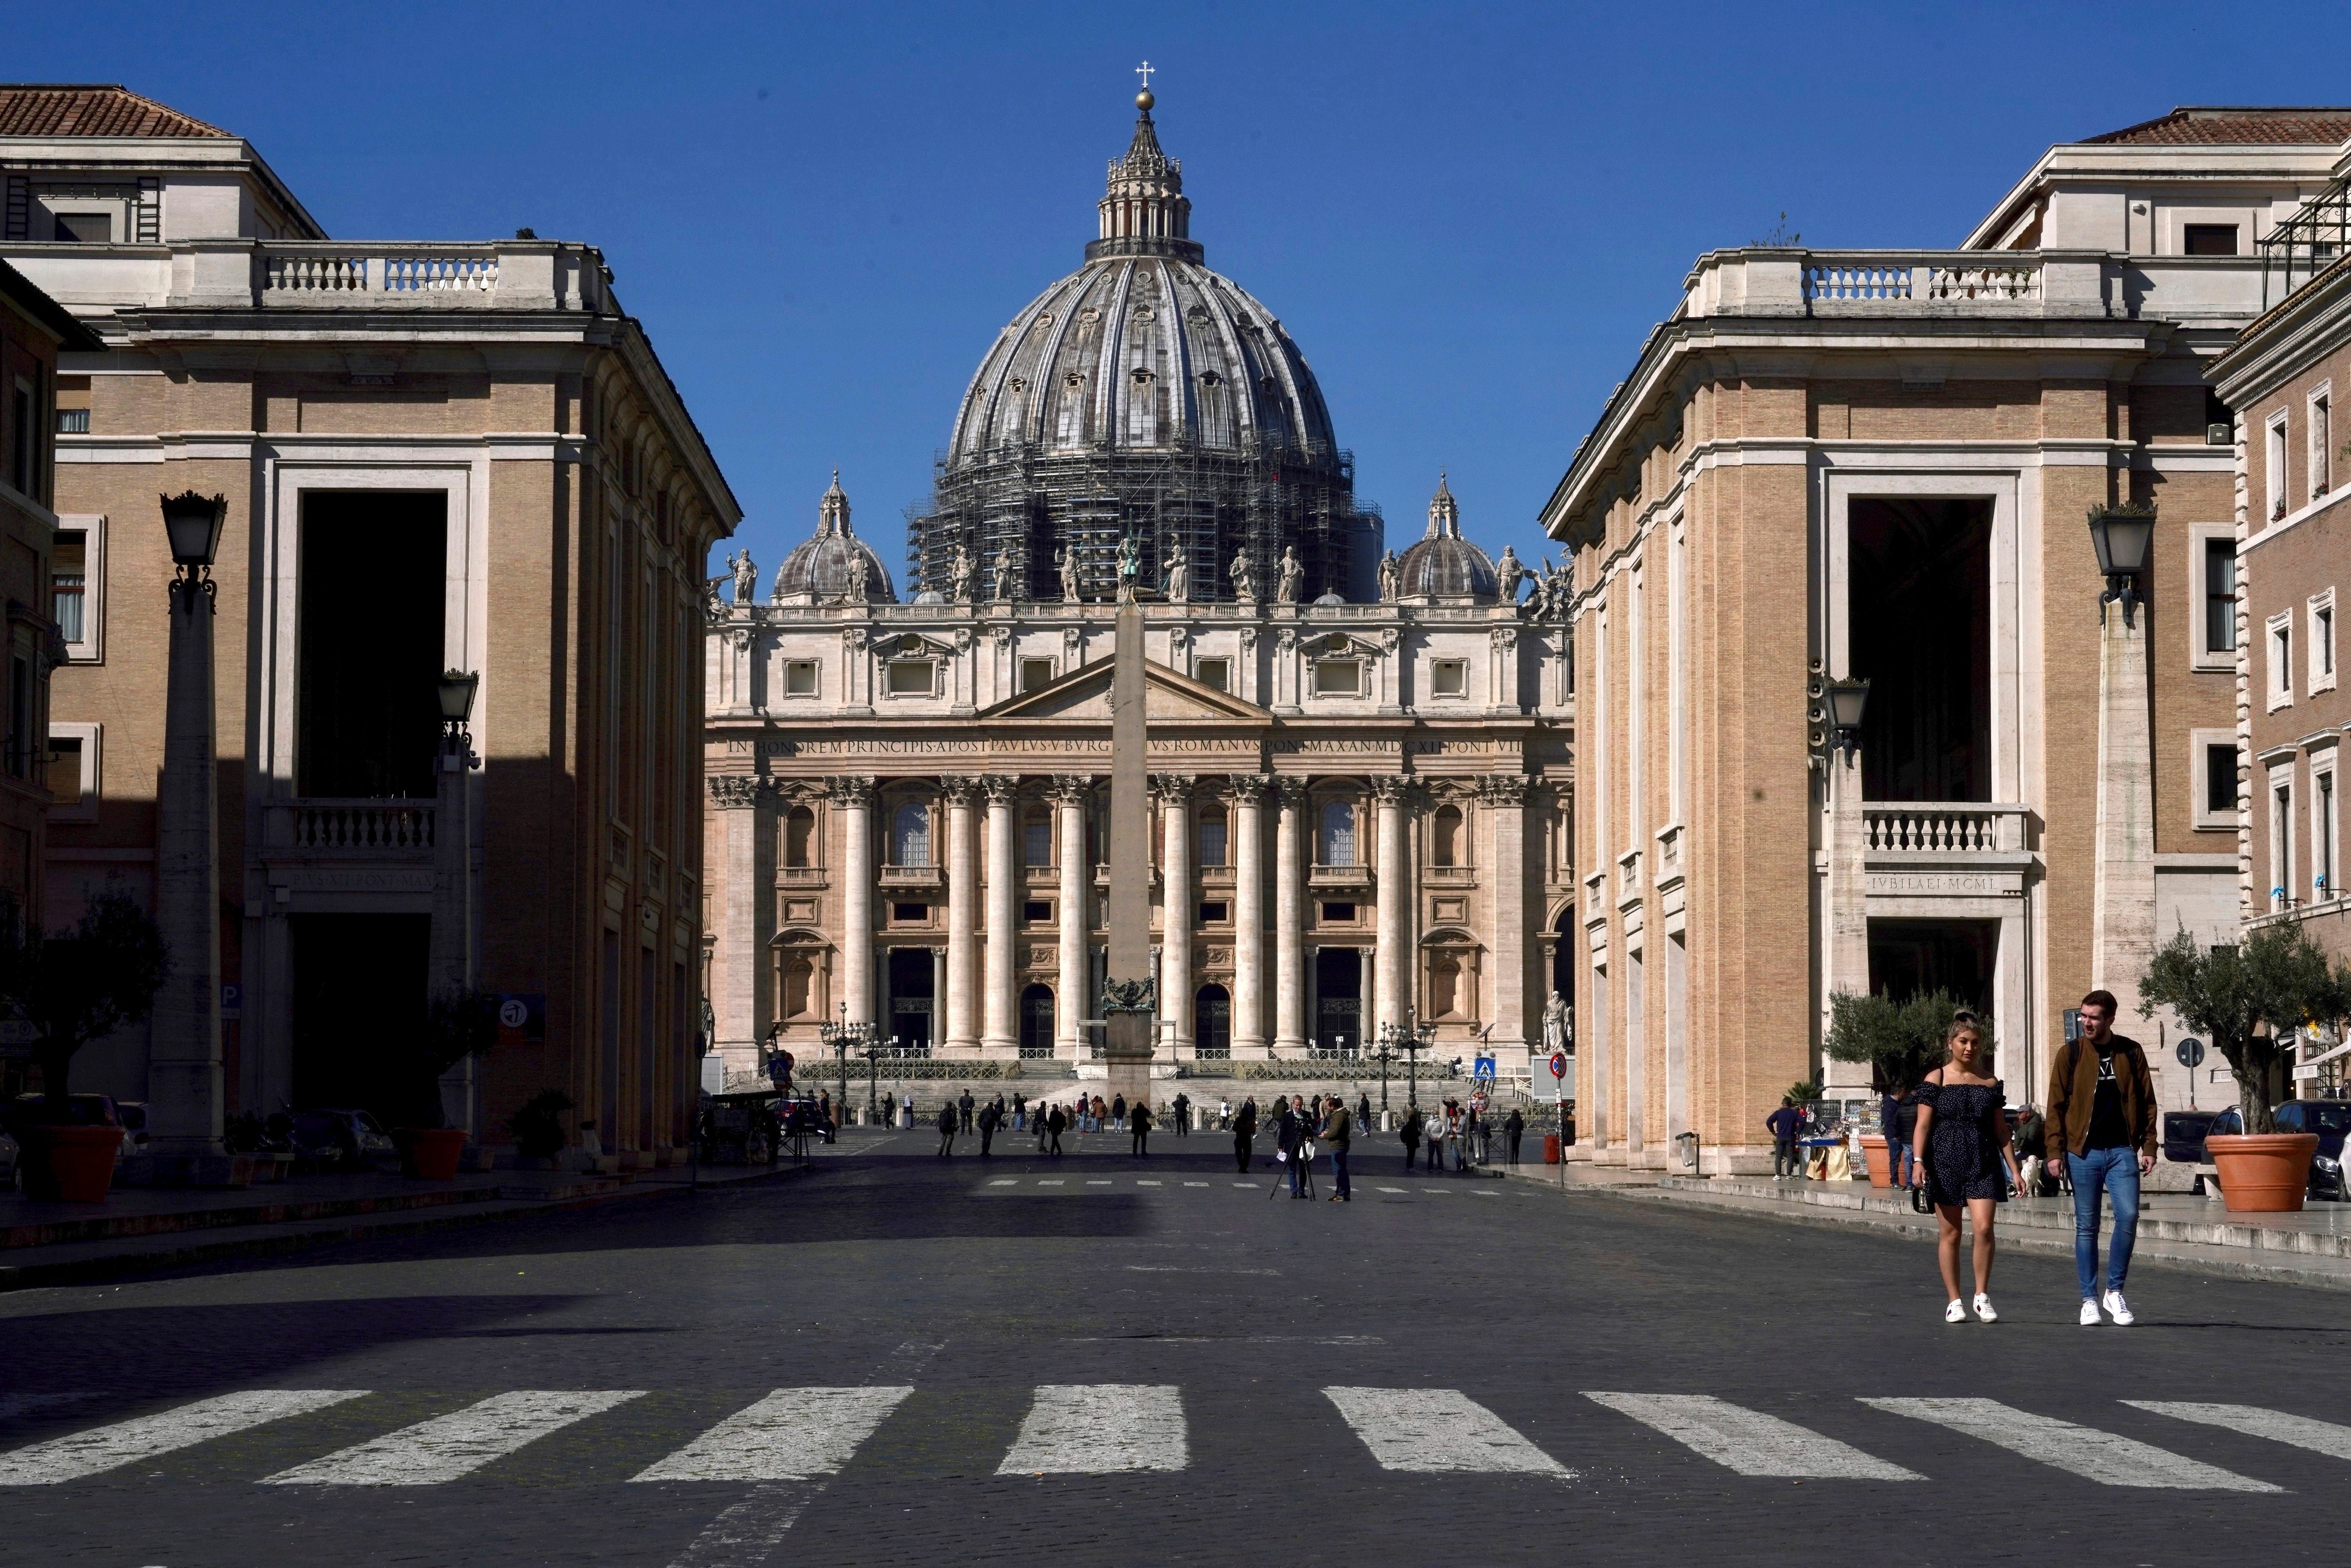 The Vatican stands trial in London as a British financier seeks to clear his name in a property deal thumbnail